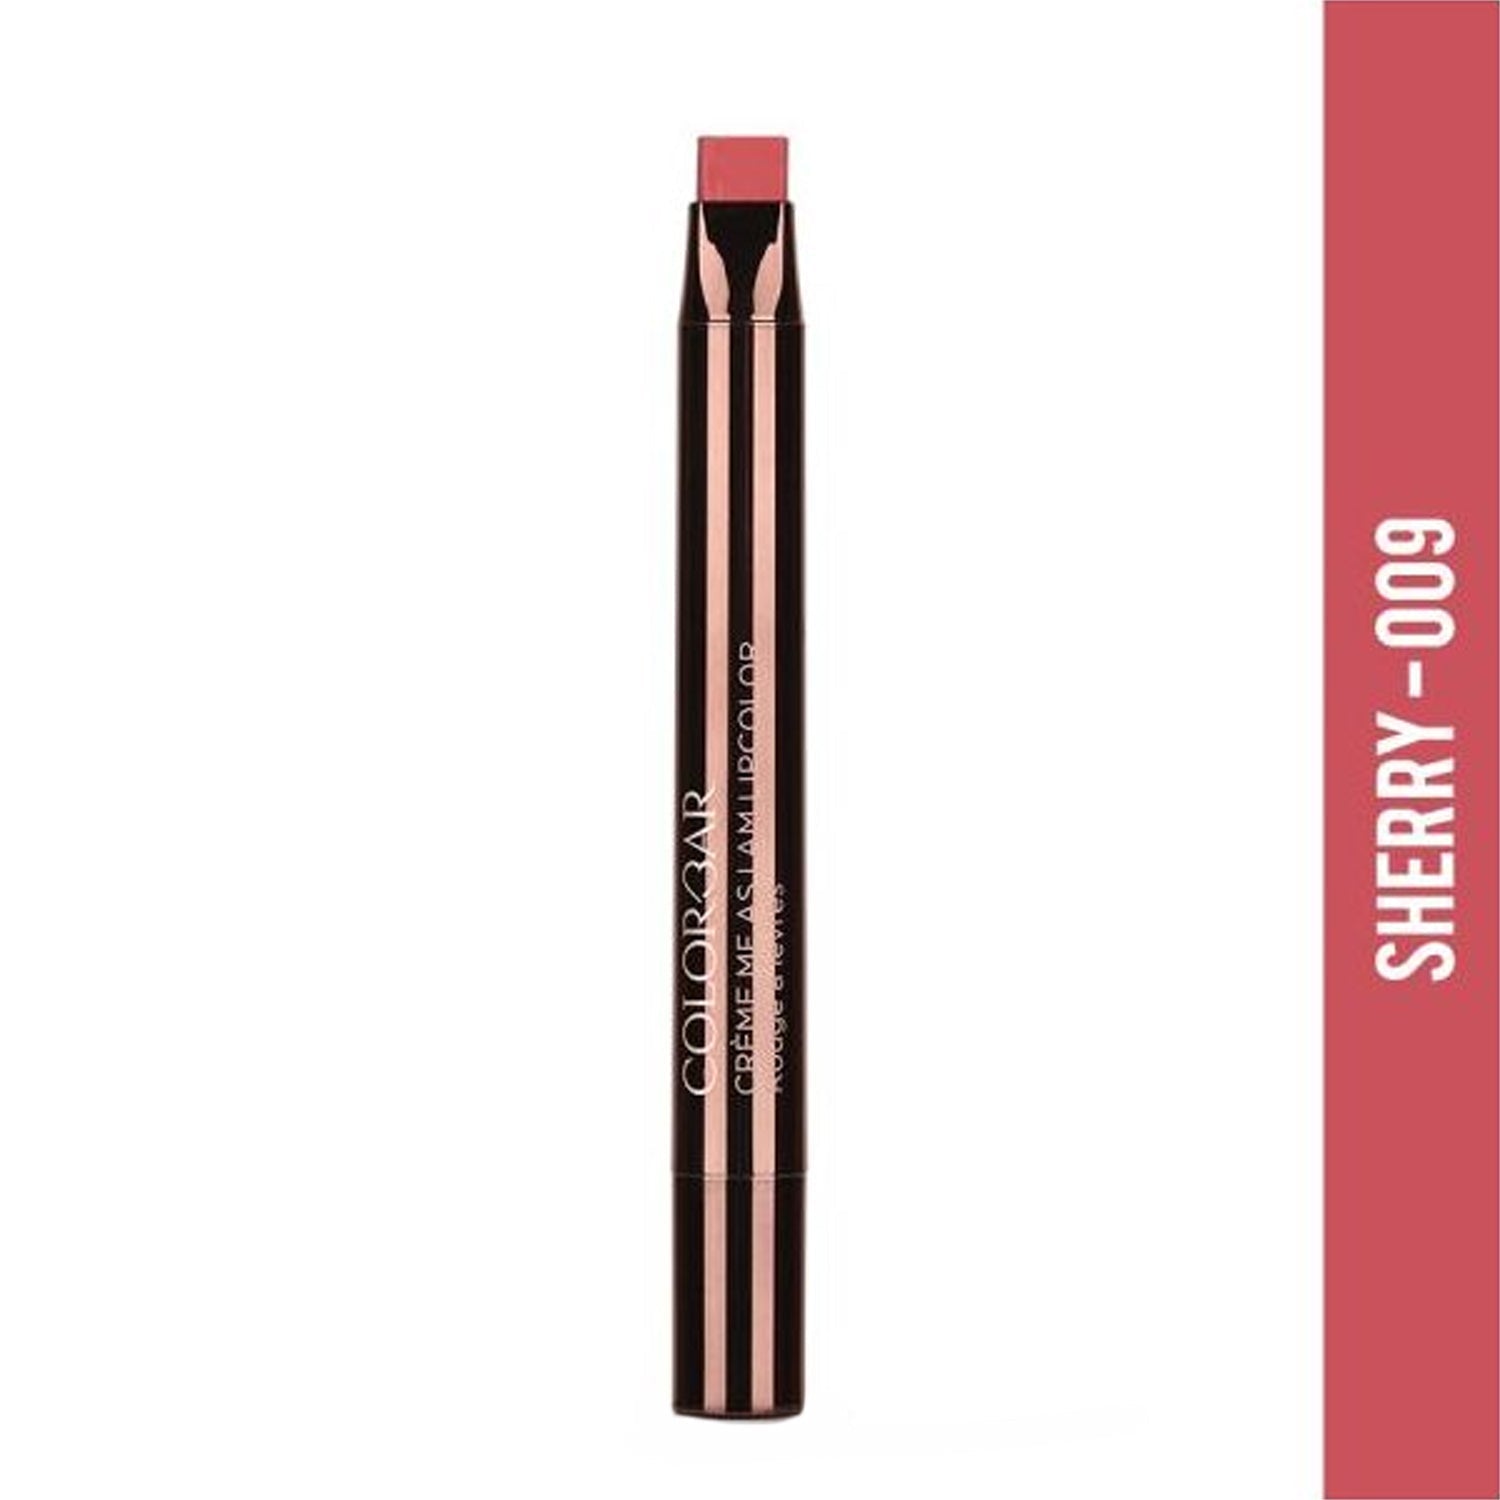 Colorbar Creme Me As I Am Lipcolor Sherry - 009 - buy in USA, Australia, Canada